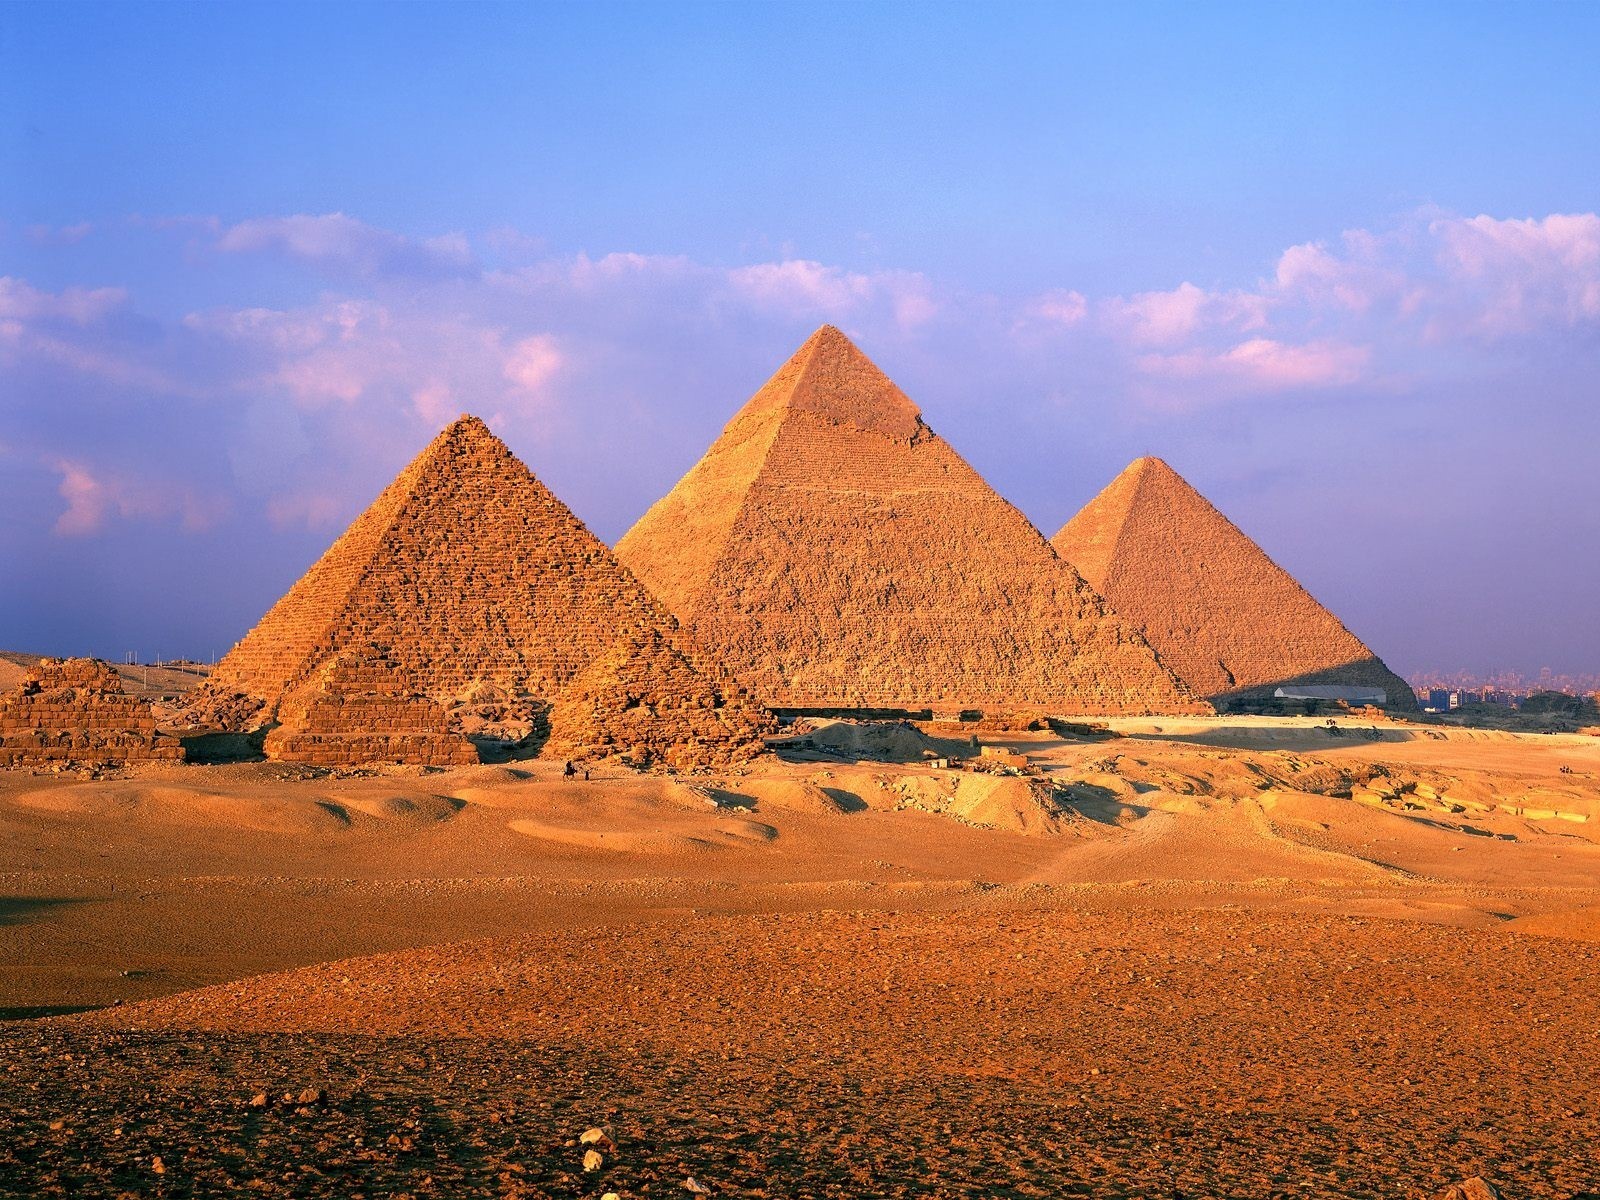 Wonders of World Pyramid of Giza in Egypt Wallpaper HD Backgrounds